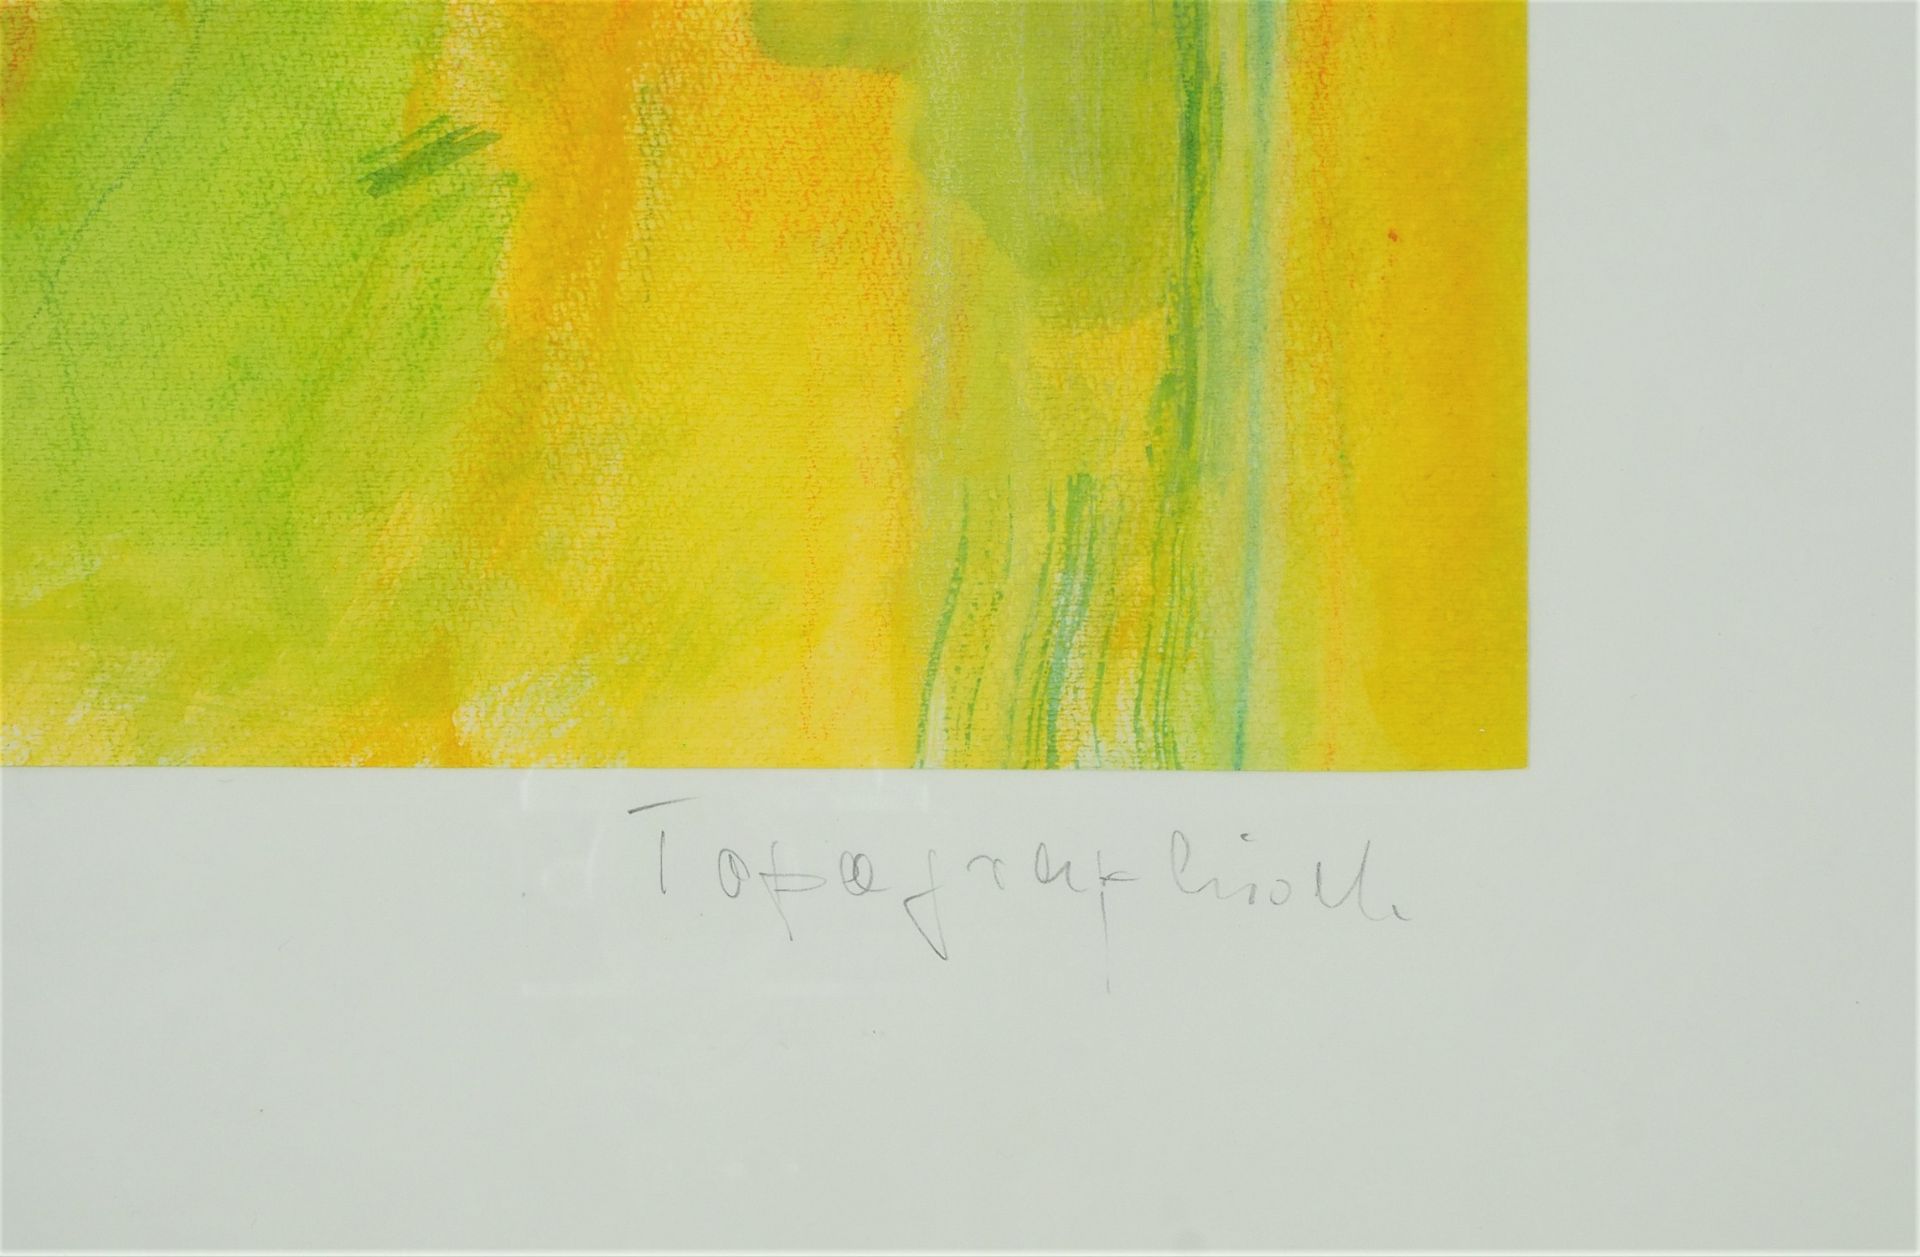 Abstract composition "Topographical" - illegibly signed, 1993. - Image 3 of 3